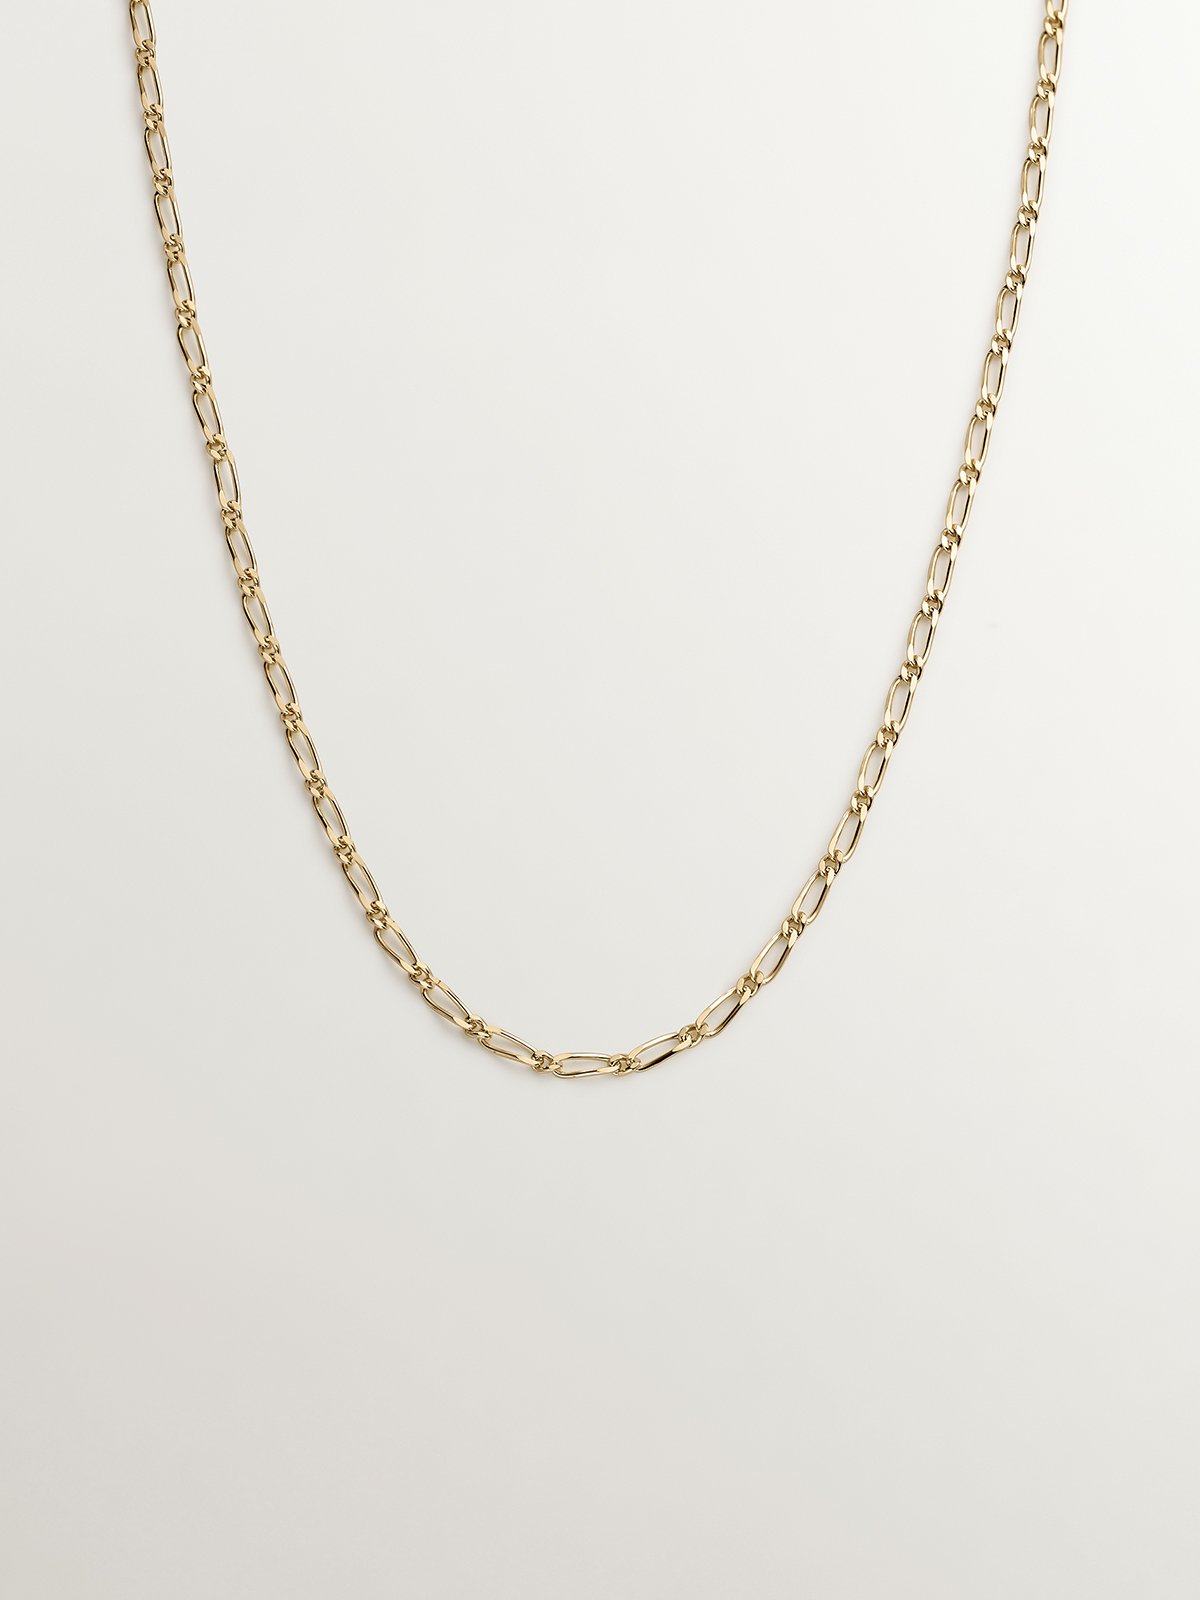 Fine chain of combined links in 9K yellow gold.